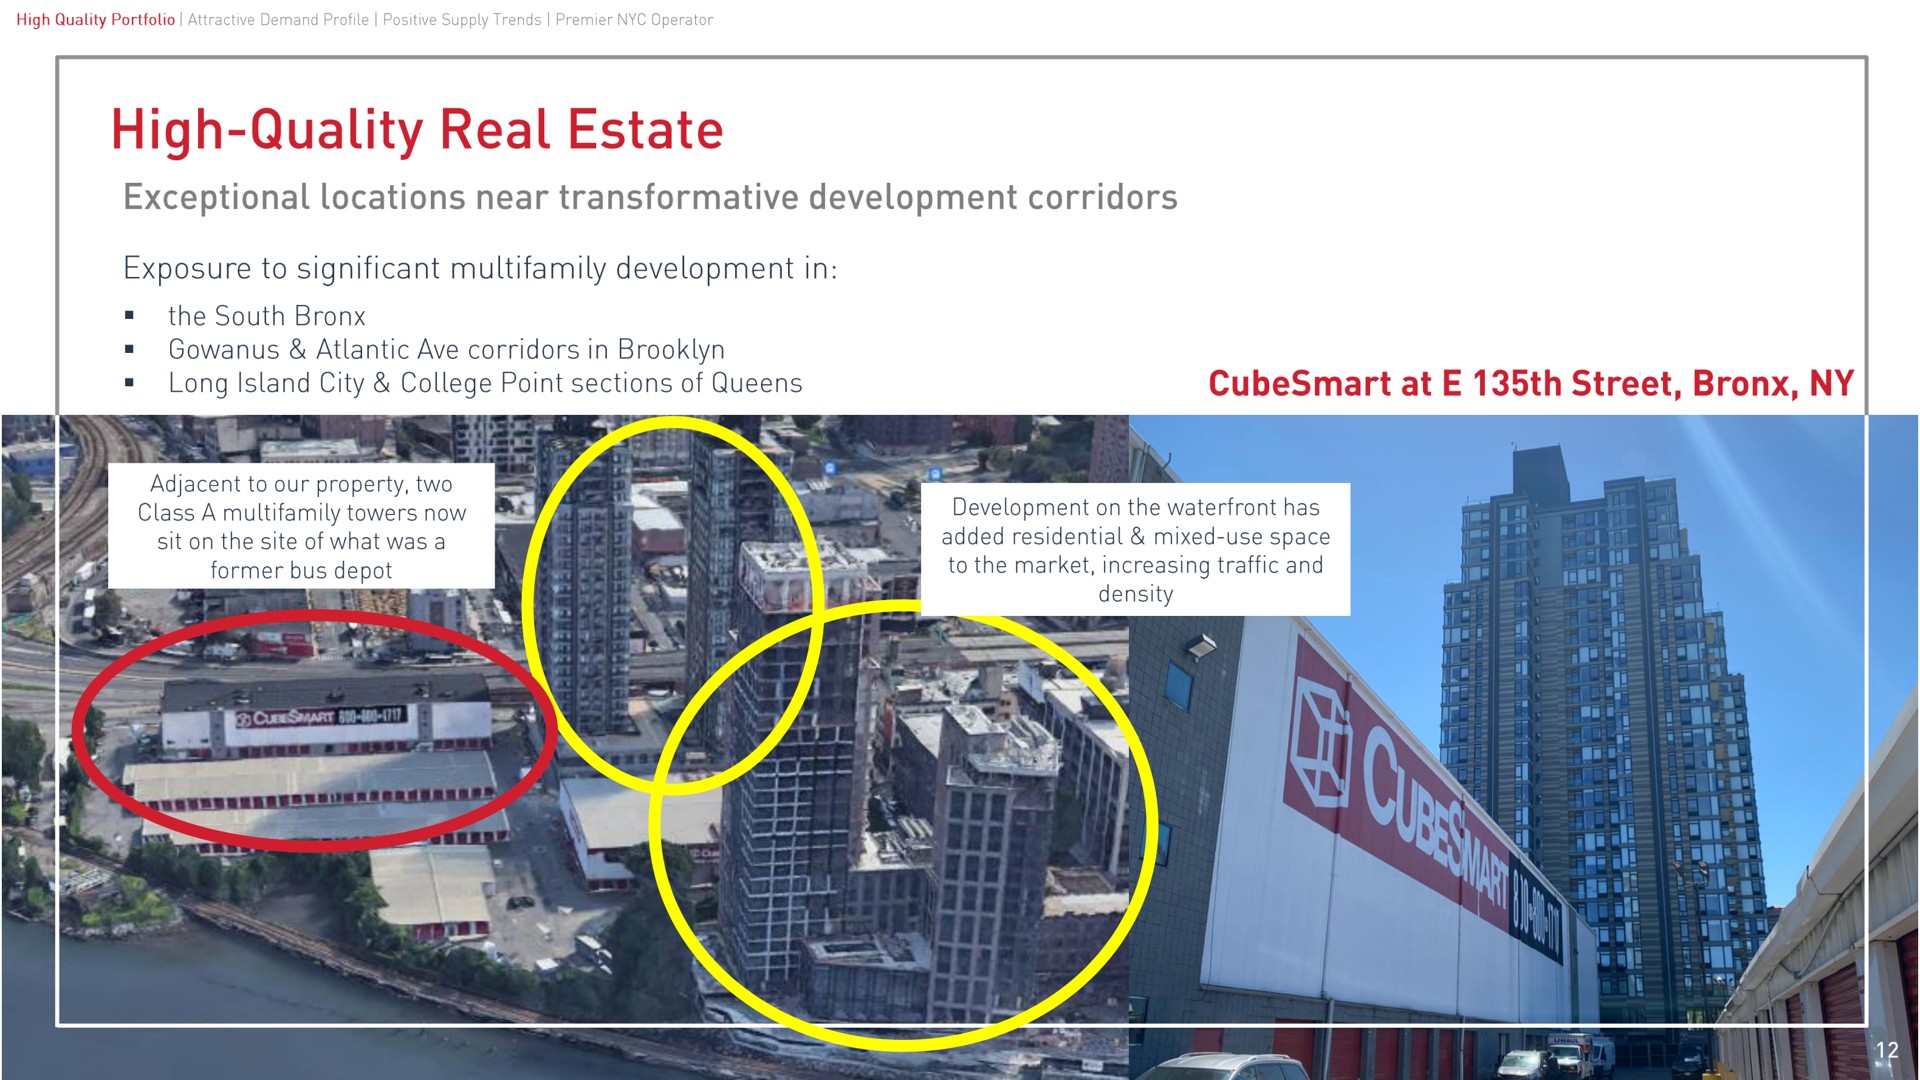 high quality real estate exceptional locations near transformative development corridors exposure to significant development atlantic ave corridors in long island city college point sections of queens at street | CubeSmart